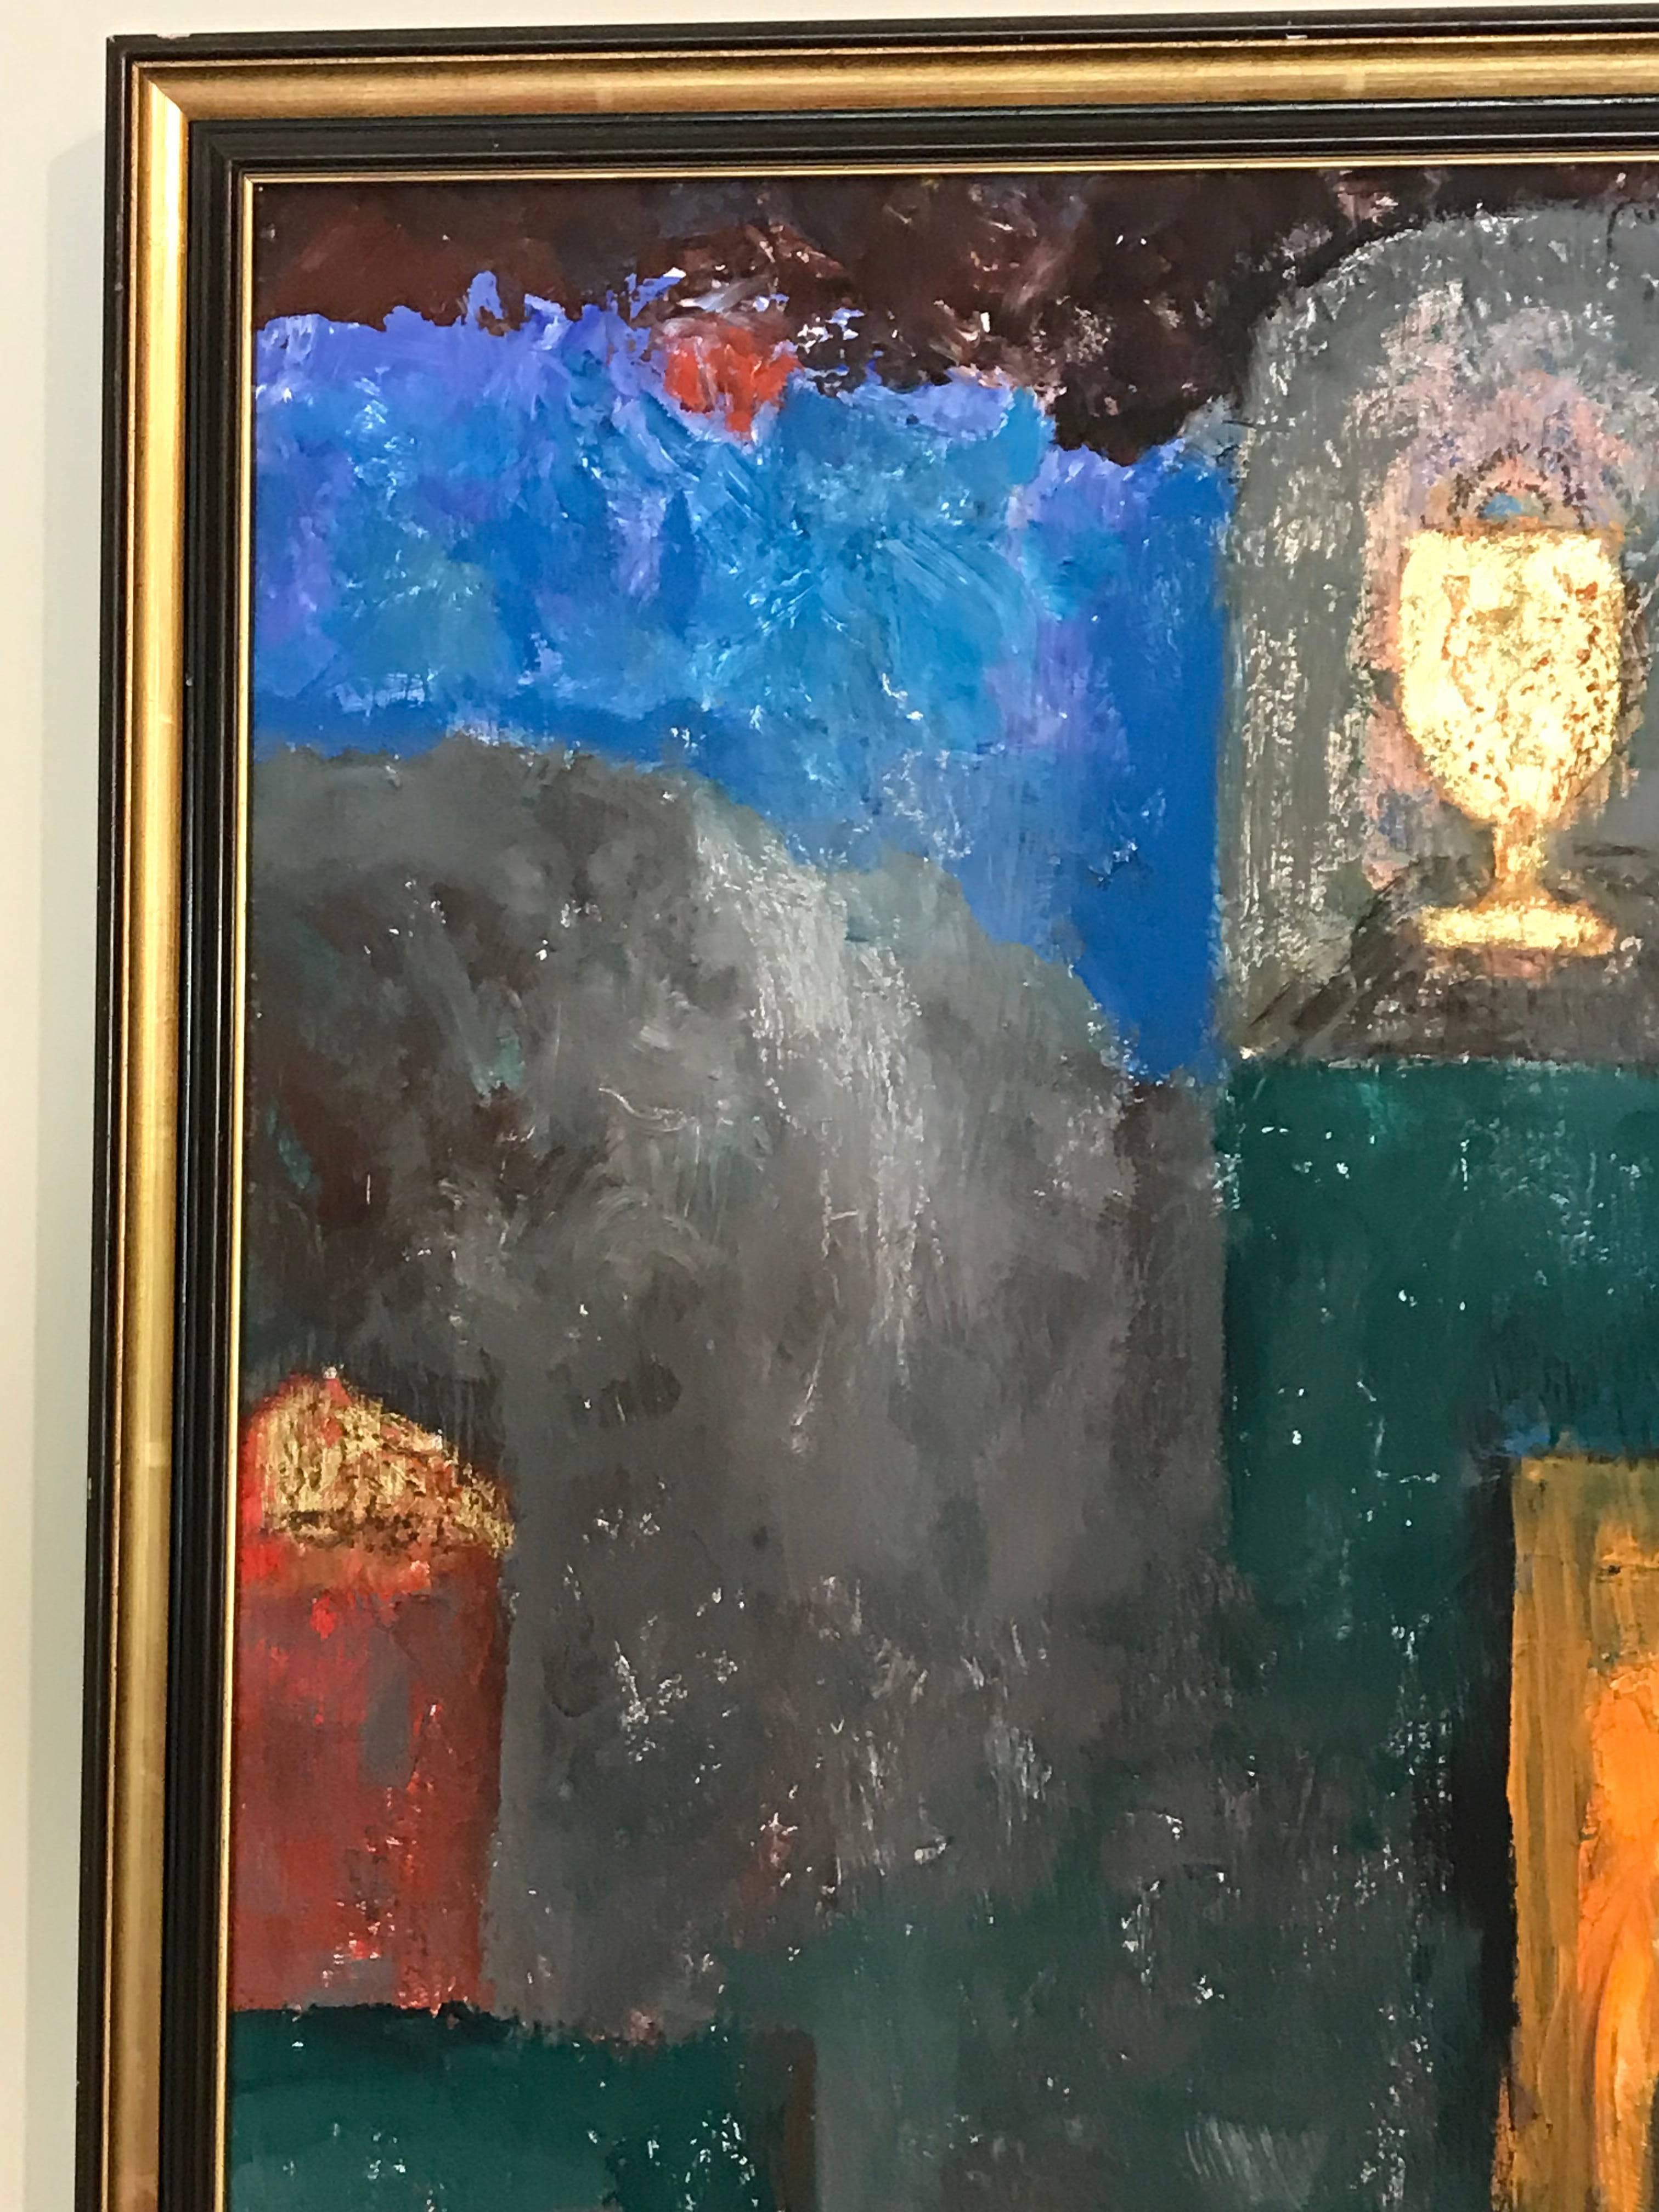 The Golden Chalice
by Armand Rottenberg (French 1903-2000)
signed lower corner, circa 1980's
oil painting on board, framed

Framed 30 x 23 inches

Stunning original abstract expressionist oil painting by the French abstract artist (and poet), Armand